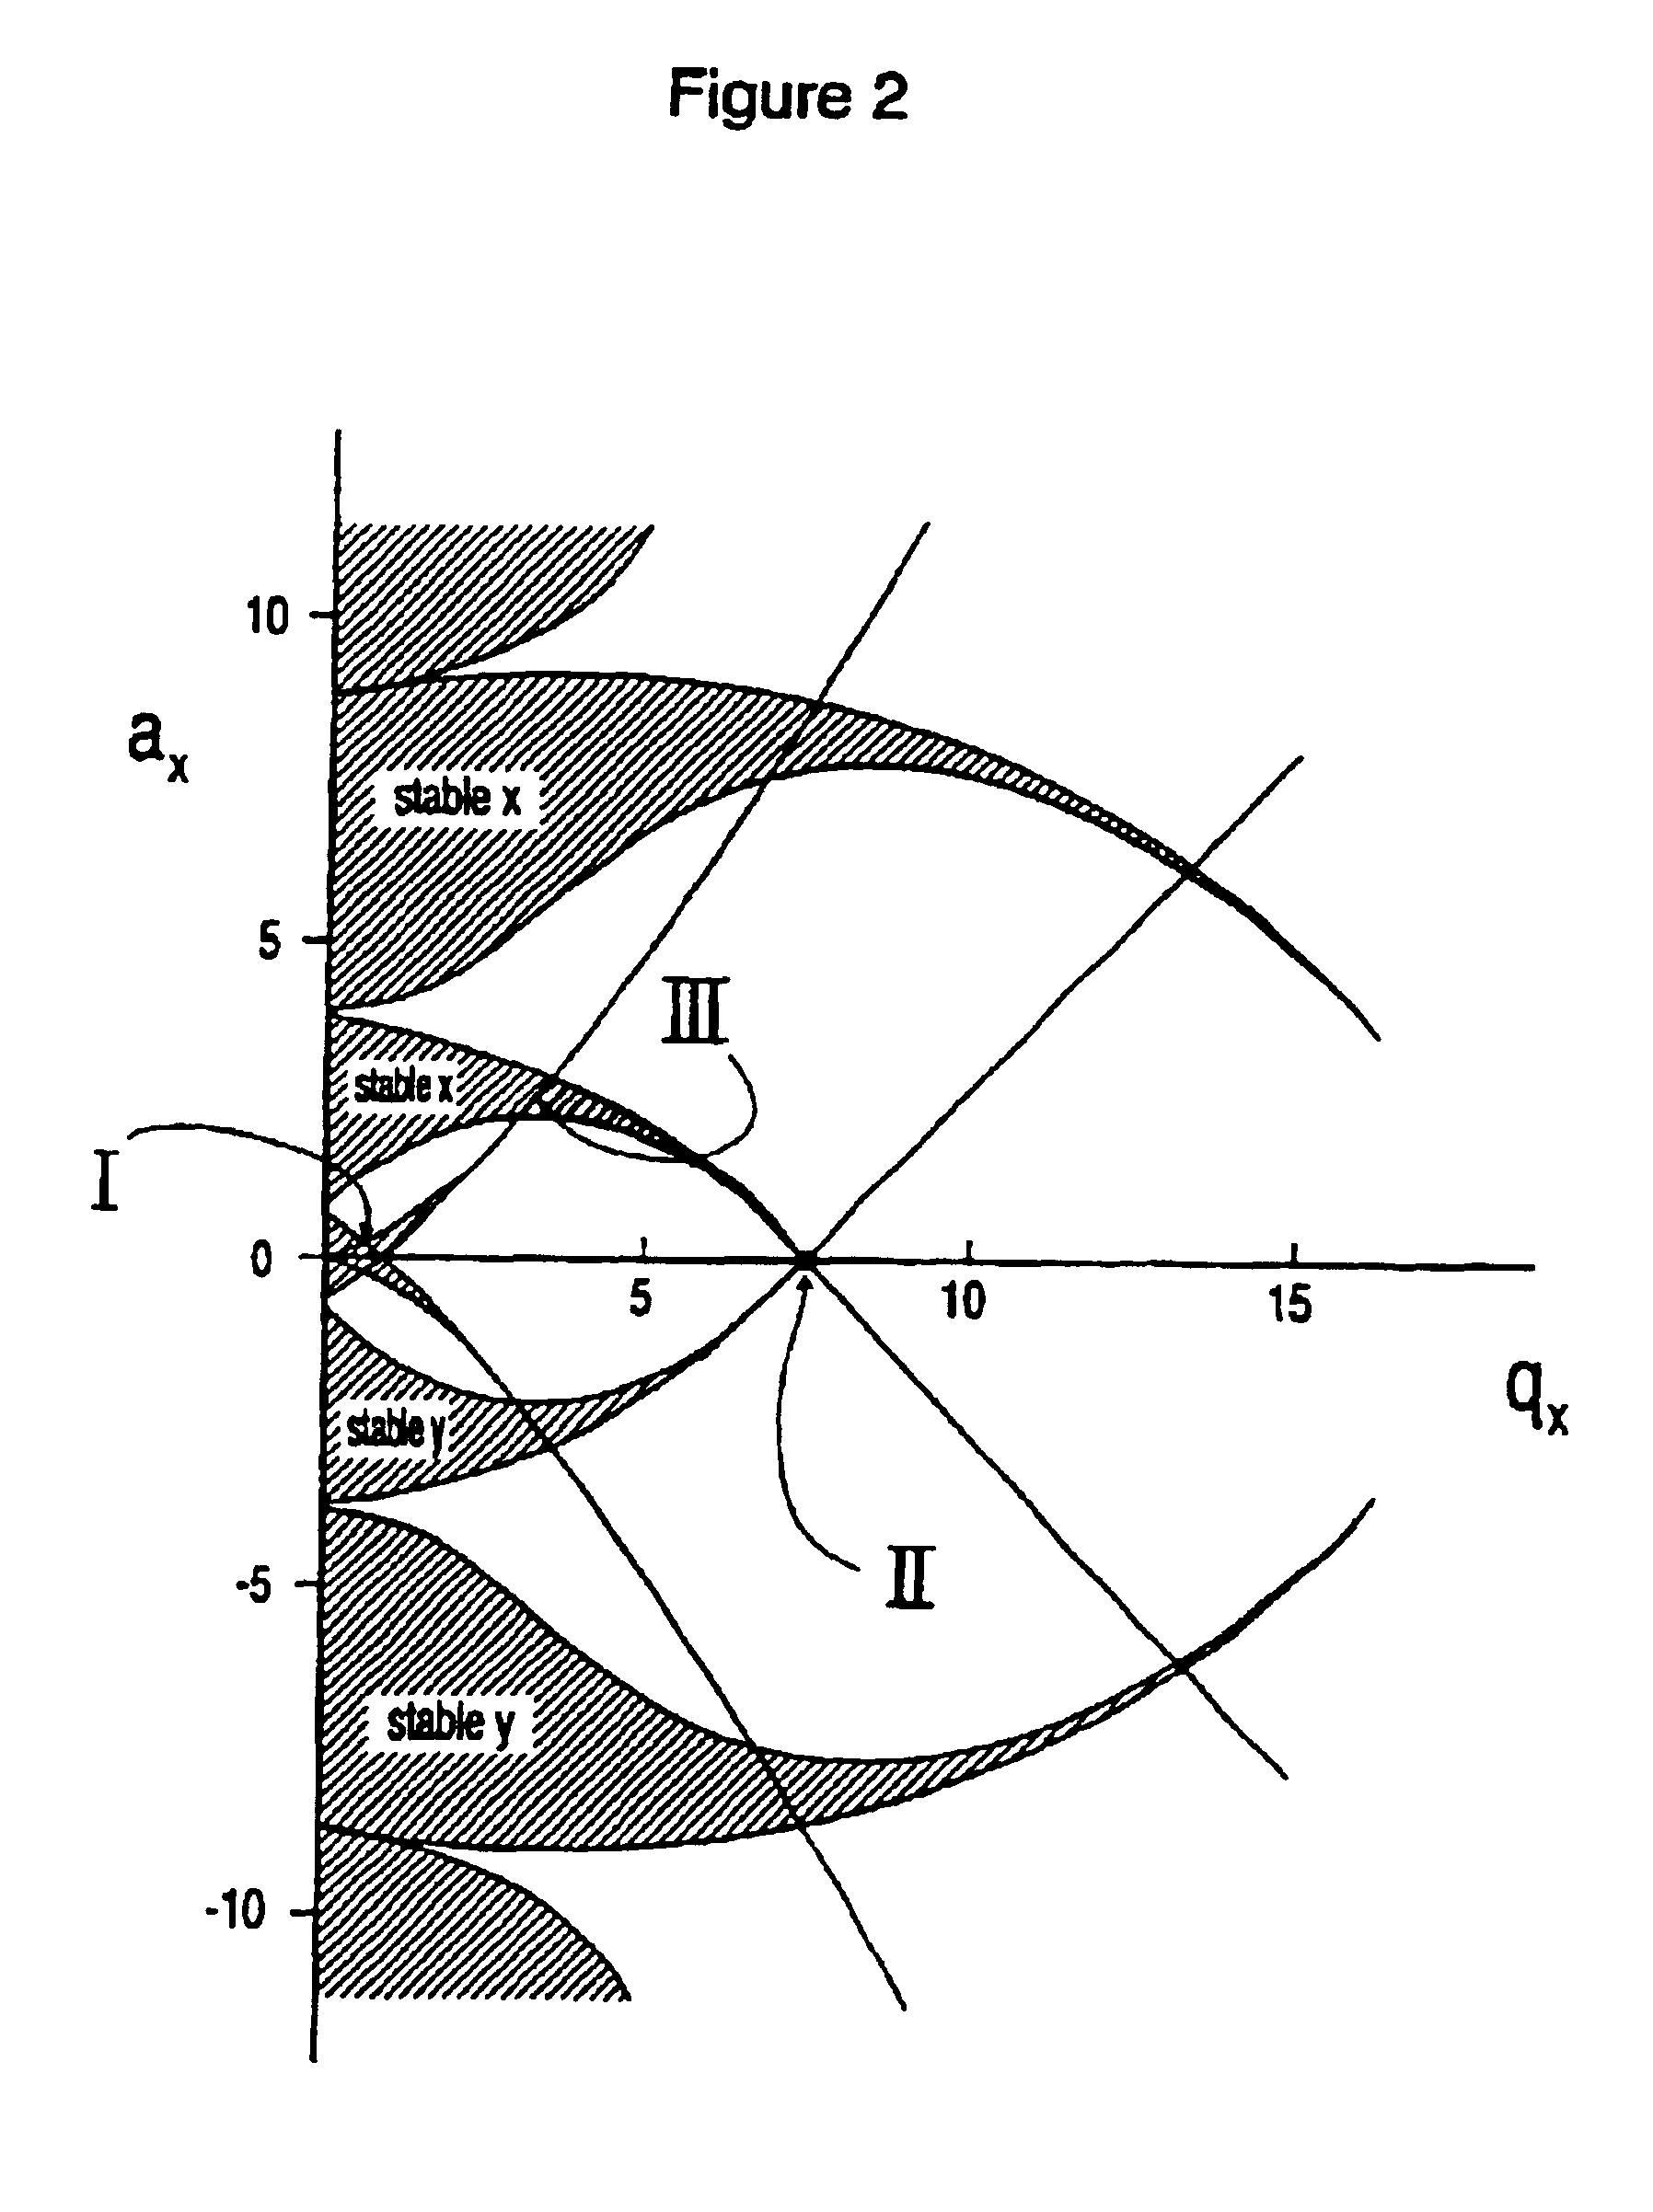 Geometry for generating a two-dimensional substantially quadrupole field